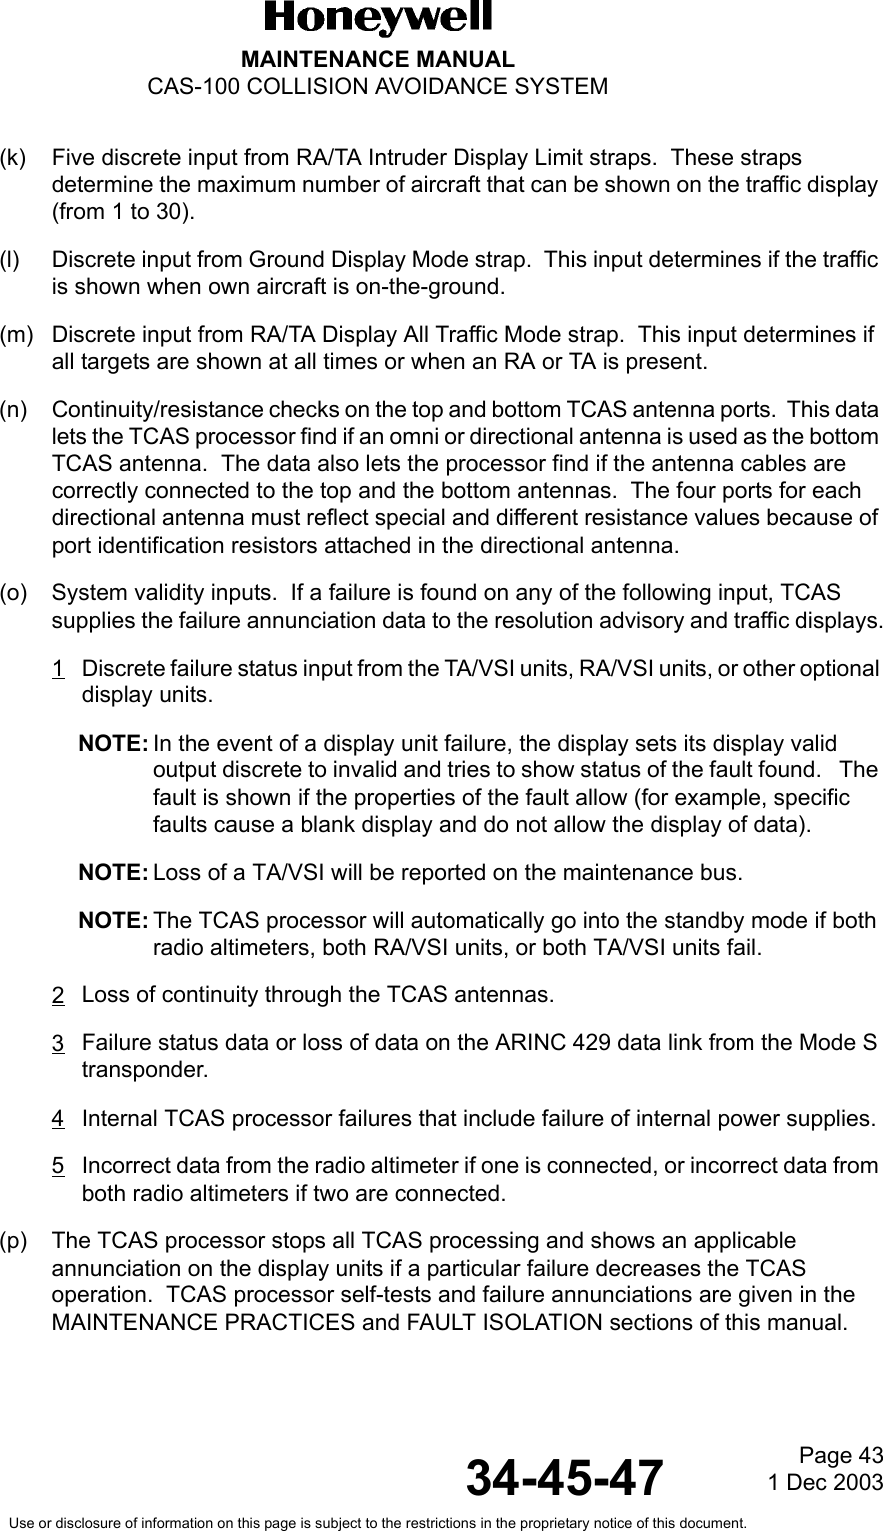 Page 431 Dec 200334-45-47MAINTENANCE MANUALCAS-100 COLLISION AVOIDANCE SYSTEMUse or disclosure of information on this page is subject to the restrictions in the proprietary notice of this document.(k) Five discrete input from RA/TA Intruder Display Limit straps.  These straps determine the maximum number of aircraft that can be shown on the traffic display (from 1 to 30).(l) Discrete input from Ground Display Mode strap.  This input determines if the traffic is shown when own aircraft is on-the-ground.(m) Discrete input from RA/TA Display All Traffic Mode strap.  This input determines if all targets are shown at all times or when an RA or TA is present.(n) Continuity/resistance checks on the top and bottom TCAS antenna ports.  This data lets the TCAS processor find if an omni or directional antenna is used as the bottom TCAS antenna.  The data also lets the processor find if the antenna cables are correctly connected to the top and the bottom antennas.  The four ports for each directional antenna must reflect special and different resistance values because of port identification resistors attached in the directional antenna.(o) System validity inputs.  If a failure is found on any of the following input, TCAS supplies the failure annunciation data to the resolution advisory and traffic displays.1Discrete failure status input from the TA/VSI units, RA/VSI units, or other optional display units.NOTE: In the event of a display unit failure, the display sets its display valid output discrete to invalid and tries to show status of the fault found.   The fault is shown if the properties of the fault allow (for example, specific faults cause a blank display and do not allow the display of data).NOTE: Loss of a TA/VSI will be reported on the maintenance bus.NOTE: The TCAS processor will automatically go into the standby mode if both radio altimeters, both RA/VSI units, or both TA/VSI units fail.2Loss of continuity through the TCAS antennas.3Failure status data or loss of data on the ARINC 429 data link from the Mode S transponder.4Internal TCAS processor failures that include failure of internal power supplies.5Incorrect data from the radio altimeter if one is connected, or incorrect data from both radio altimeters if two are connected.(p) The TCAS processor stops all TCAS processing and shows an applicable annunciation on the display units if a particular failure decreases the TCAS operation.  TCAS processor self-tests and failure annunciations are given in the MAINTENANCE PRACTICES and FAULT ISOLATION sections of this manual.